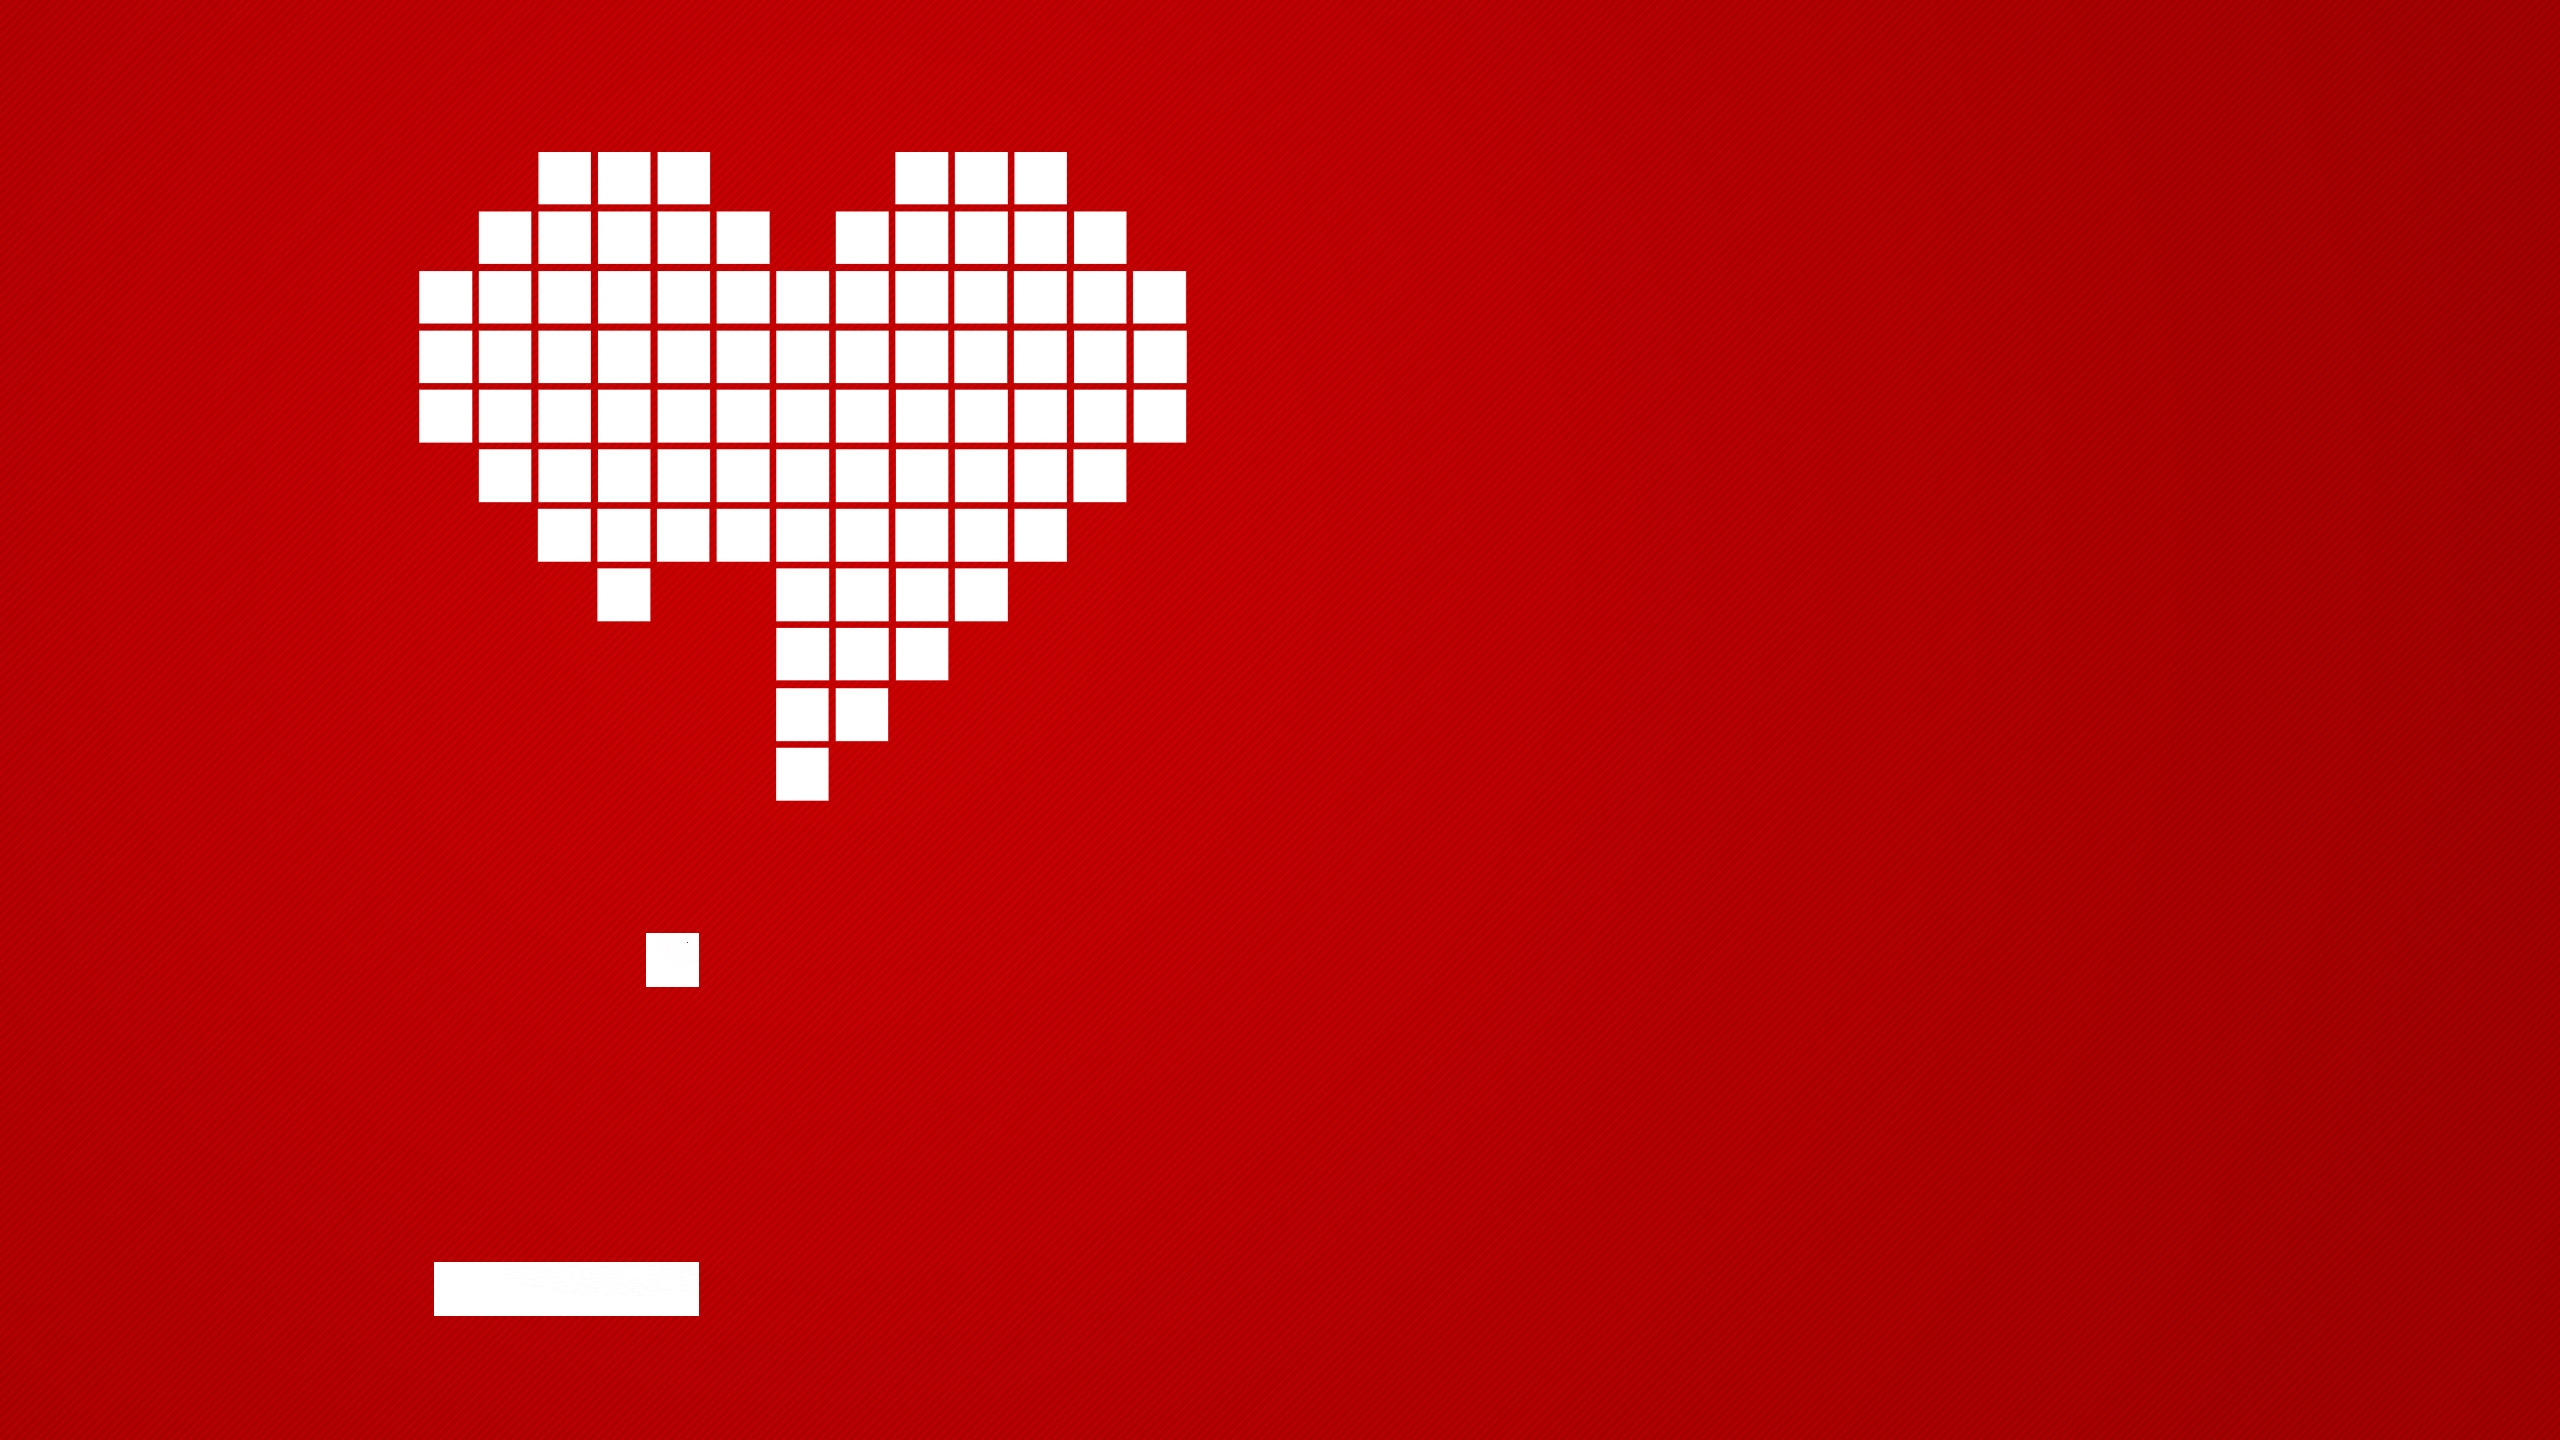 Heart Gaming for 2560x1440 HDTV resolution